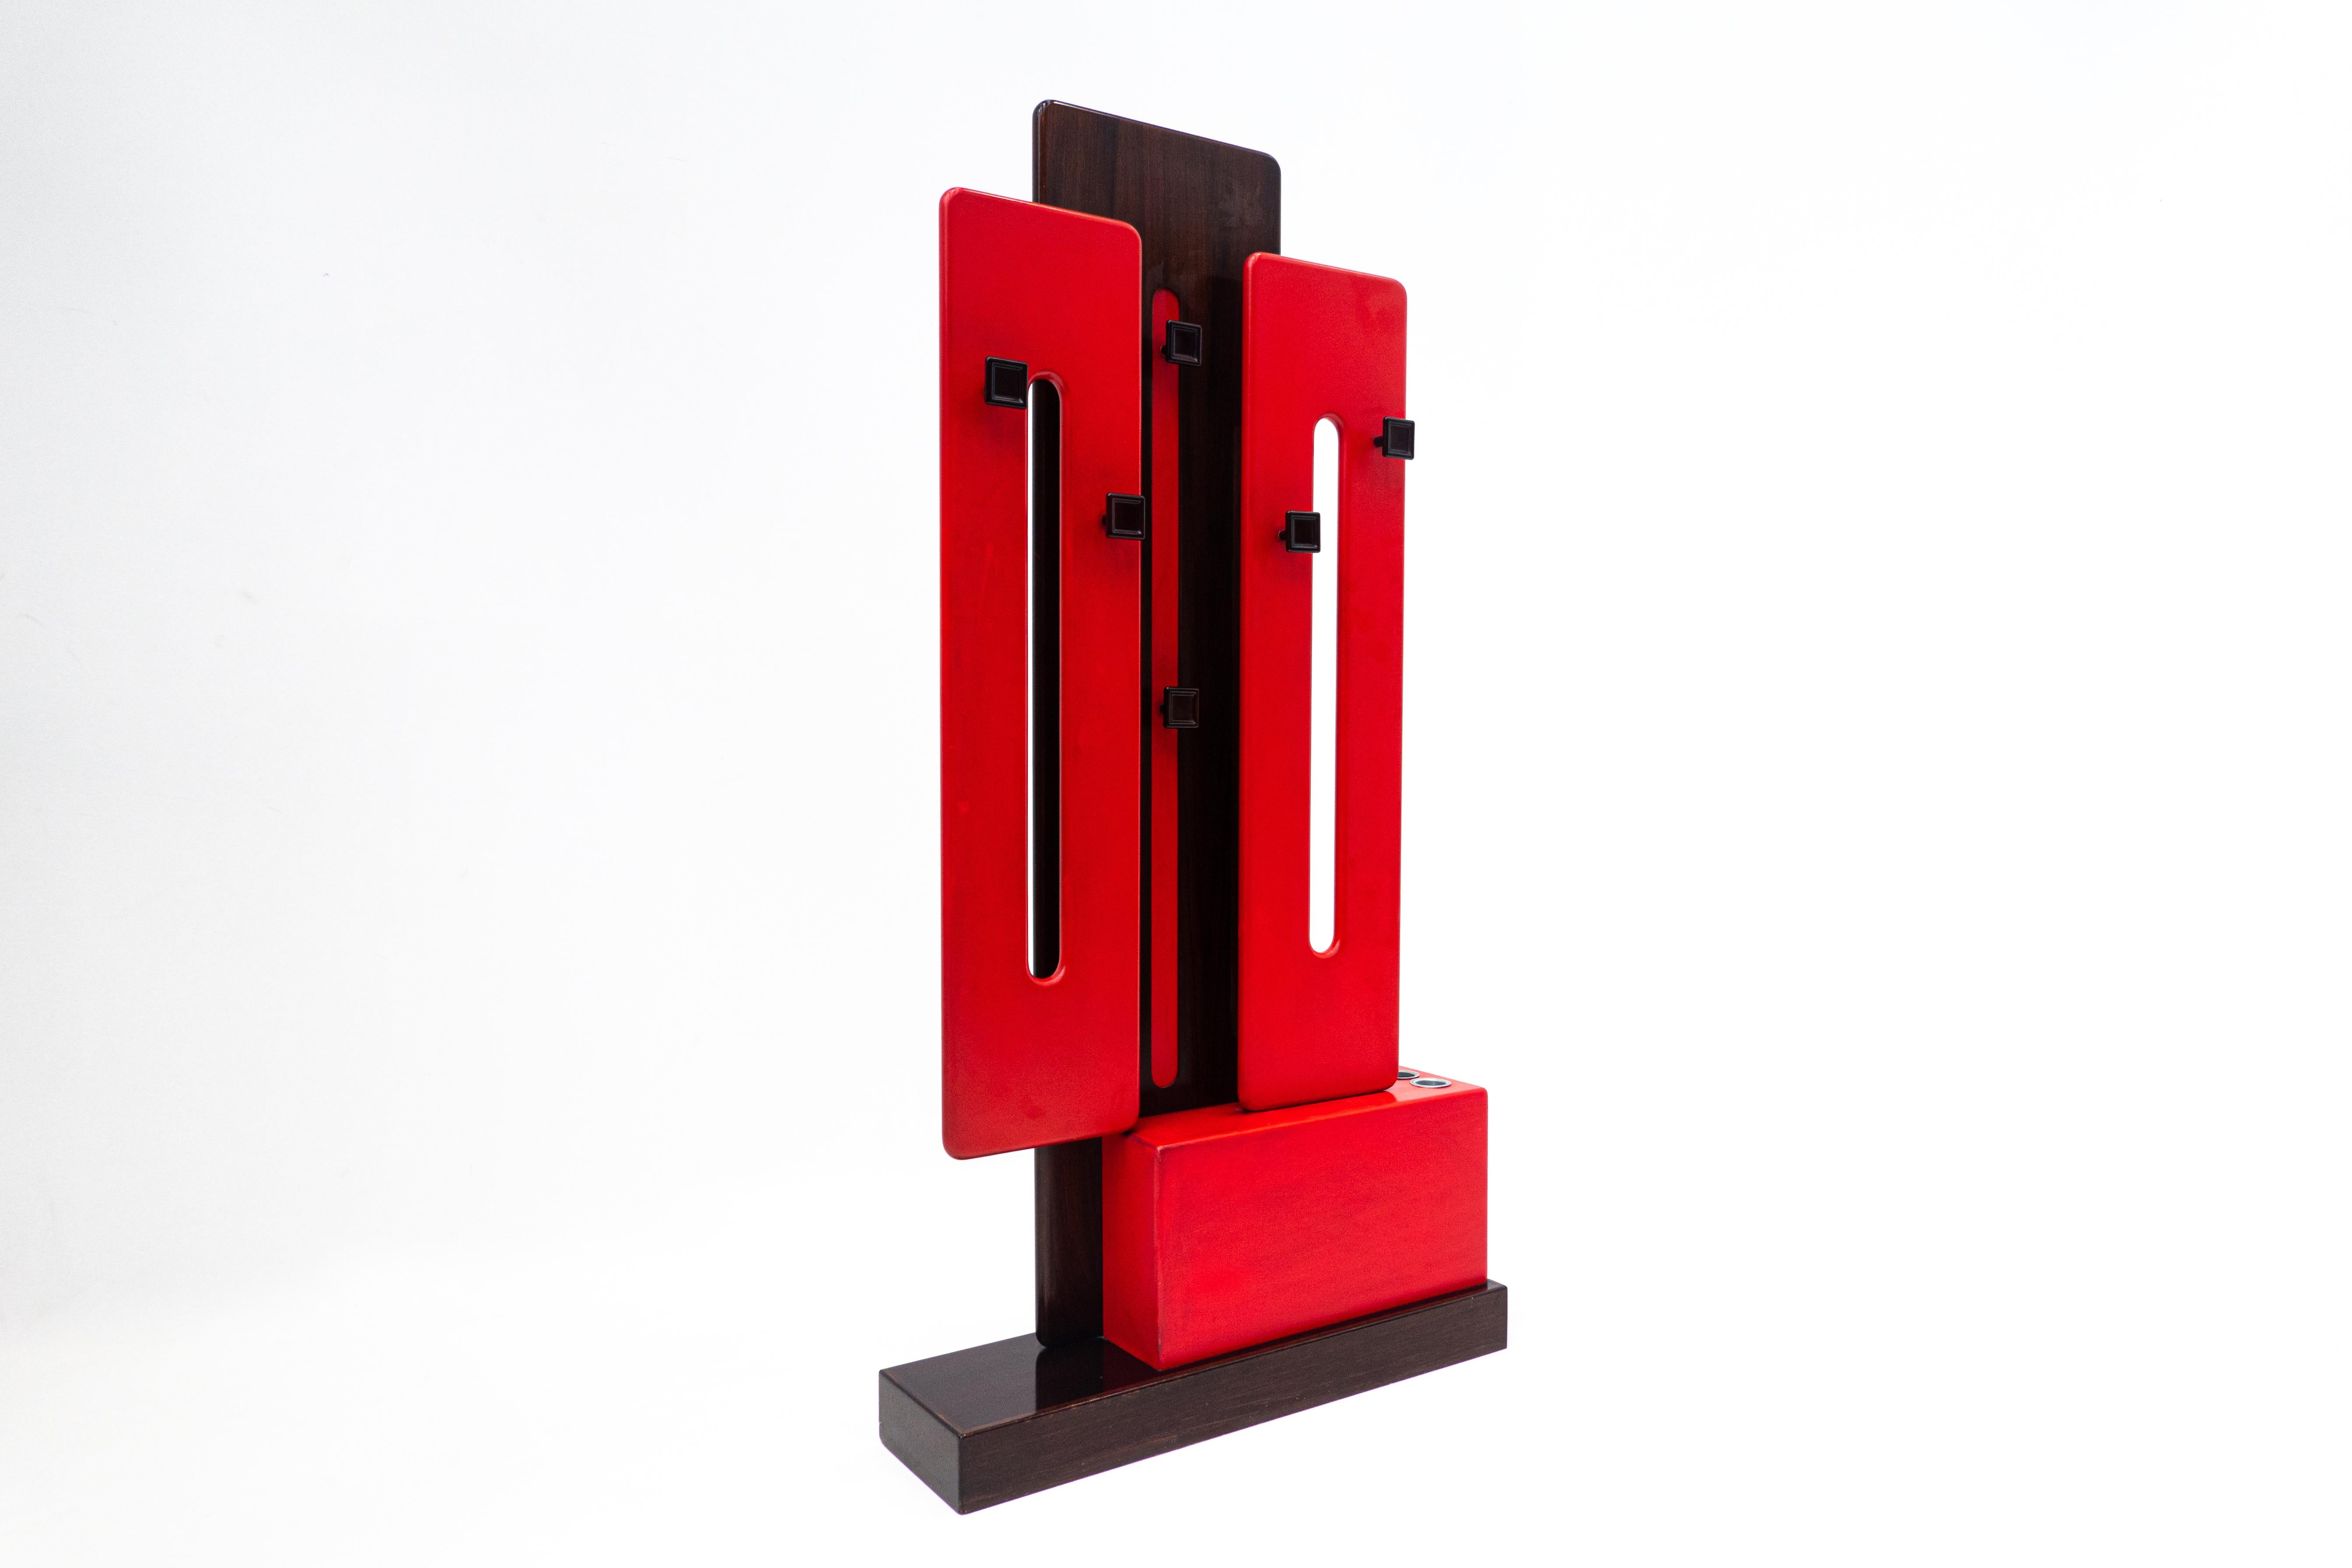 Mid-century red modulable coat rack by Carlo di Carli for Fiarm, Italy 1960s.